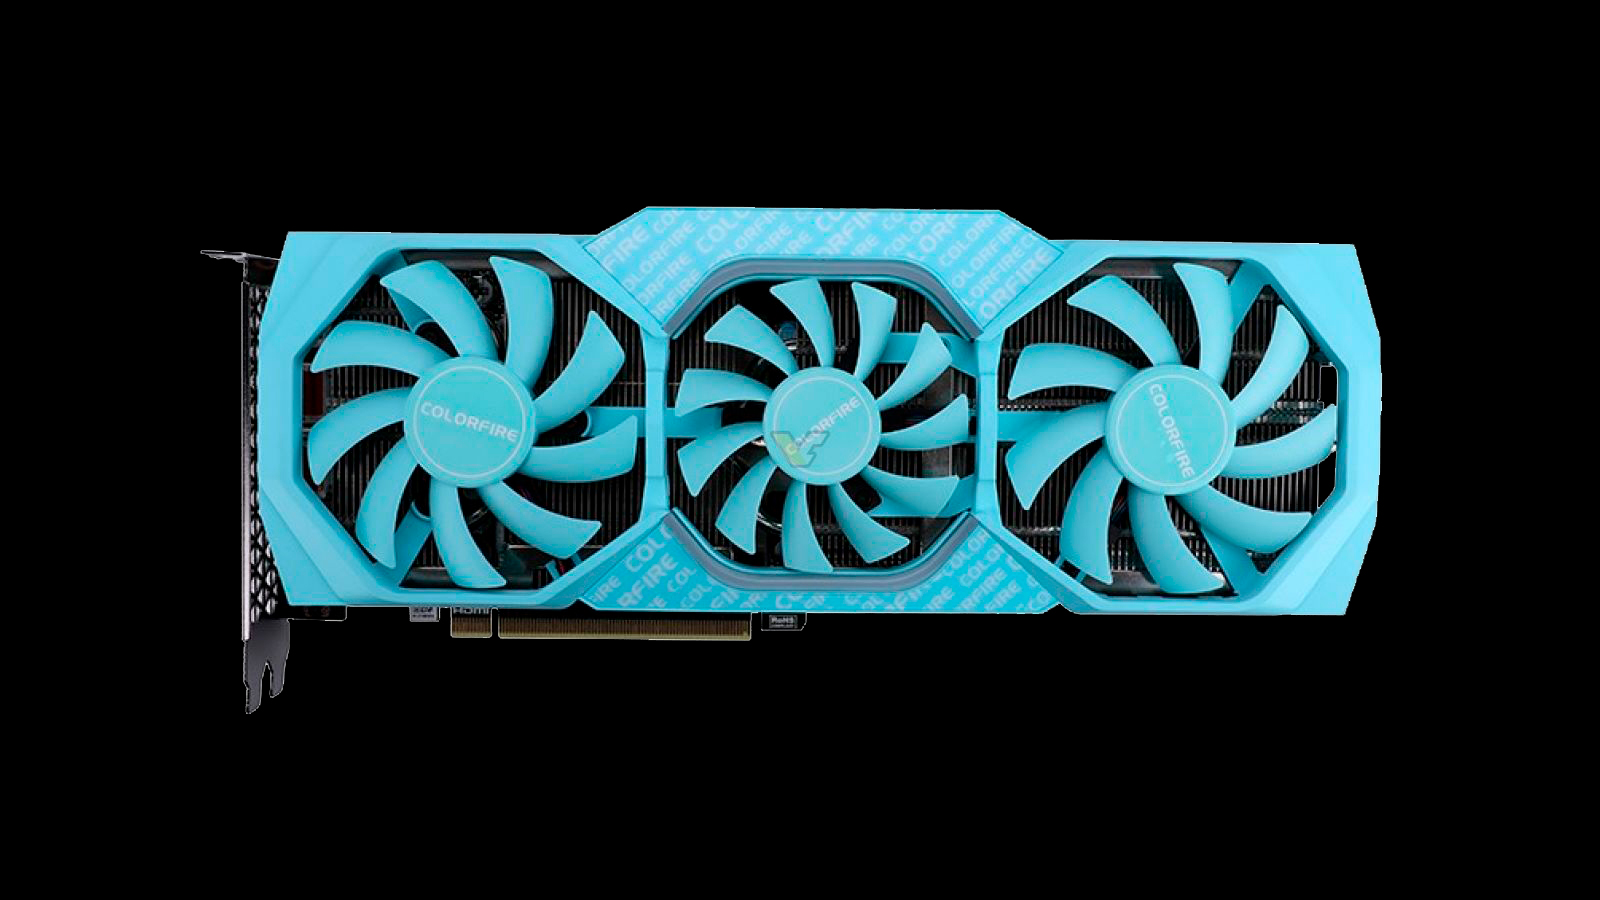 ColorFire Dips GeForce RTX 3060, RTX 3060 Ti GPUs In Pastel Colors